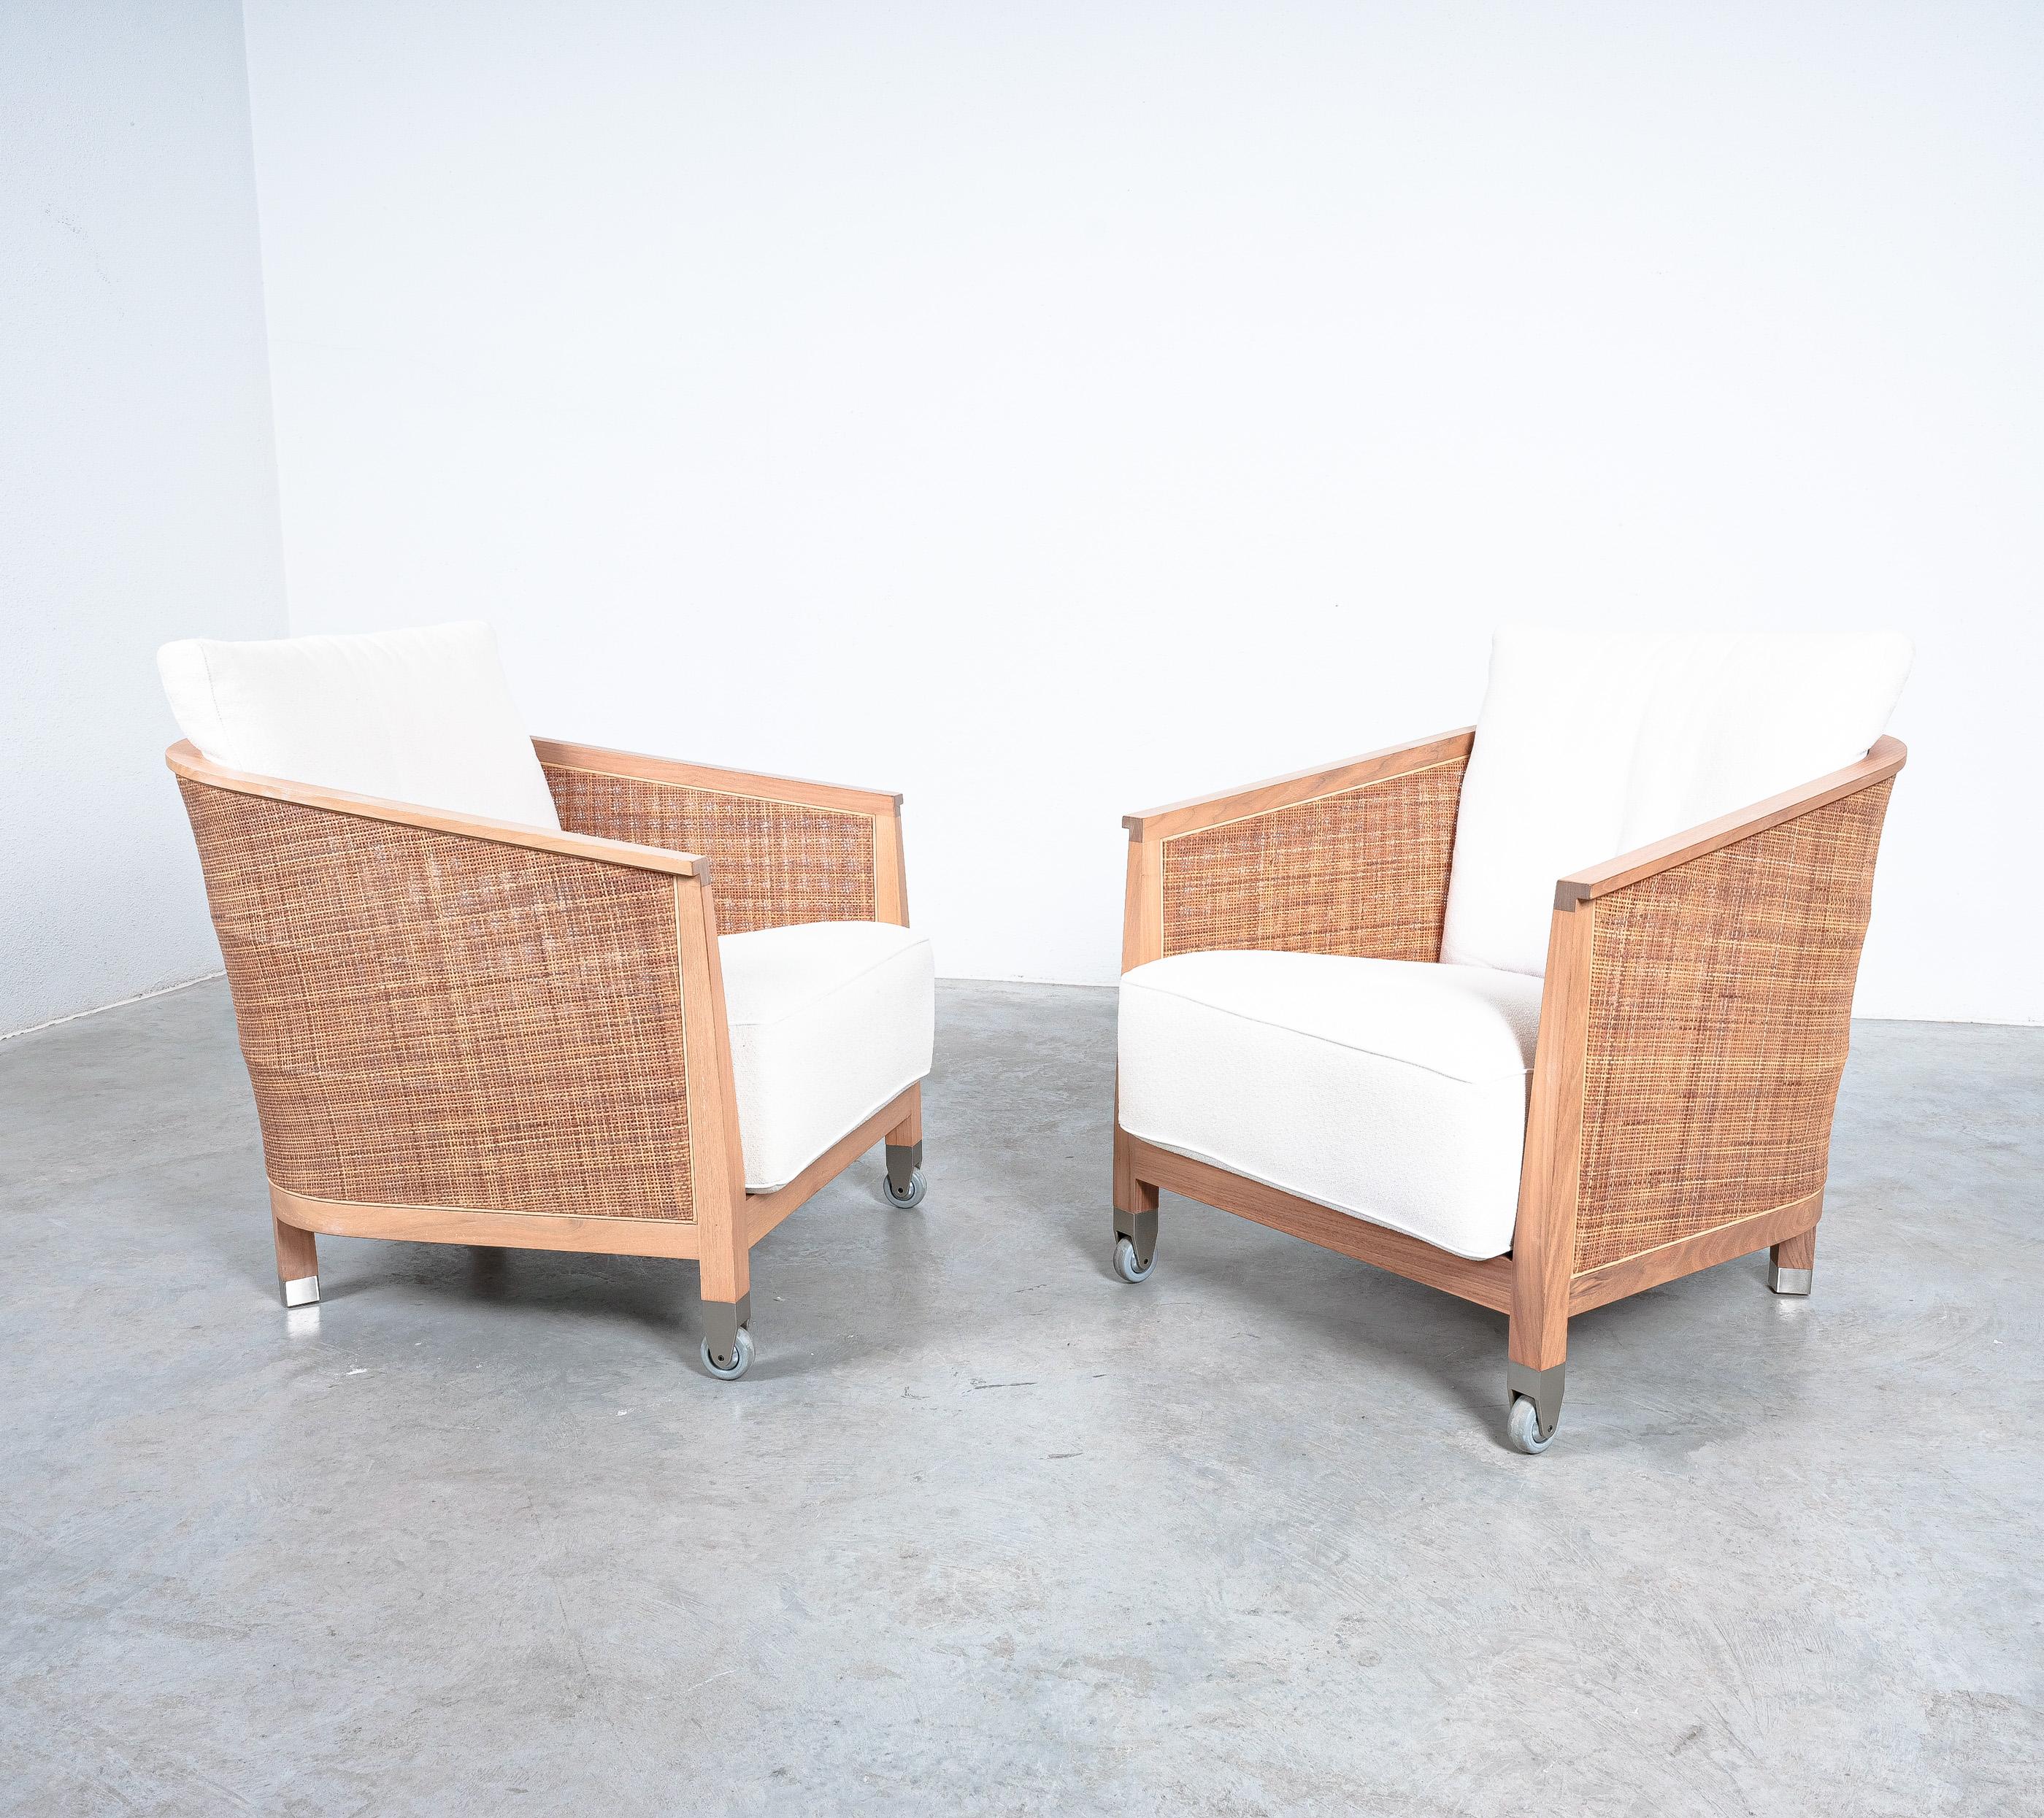 A pair of Mozart chairs by Flexform, Italy 1996- Priced as a pair

Great comfort chairs from solid ash-wood and canaletto - work (rush netting).
It's from outstanding quality with a certain outdoor charm and certainly to be used outdoors as well.